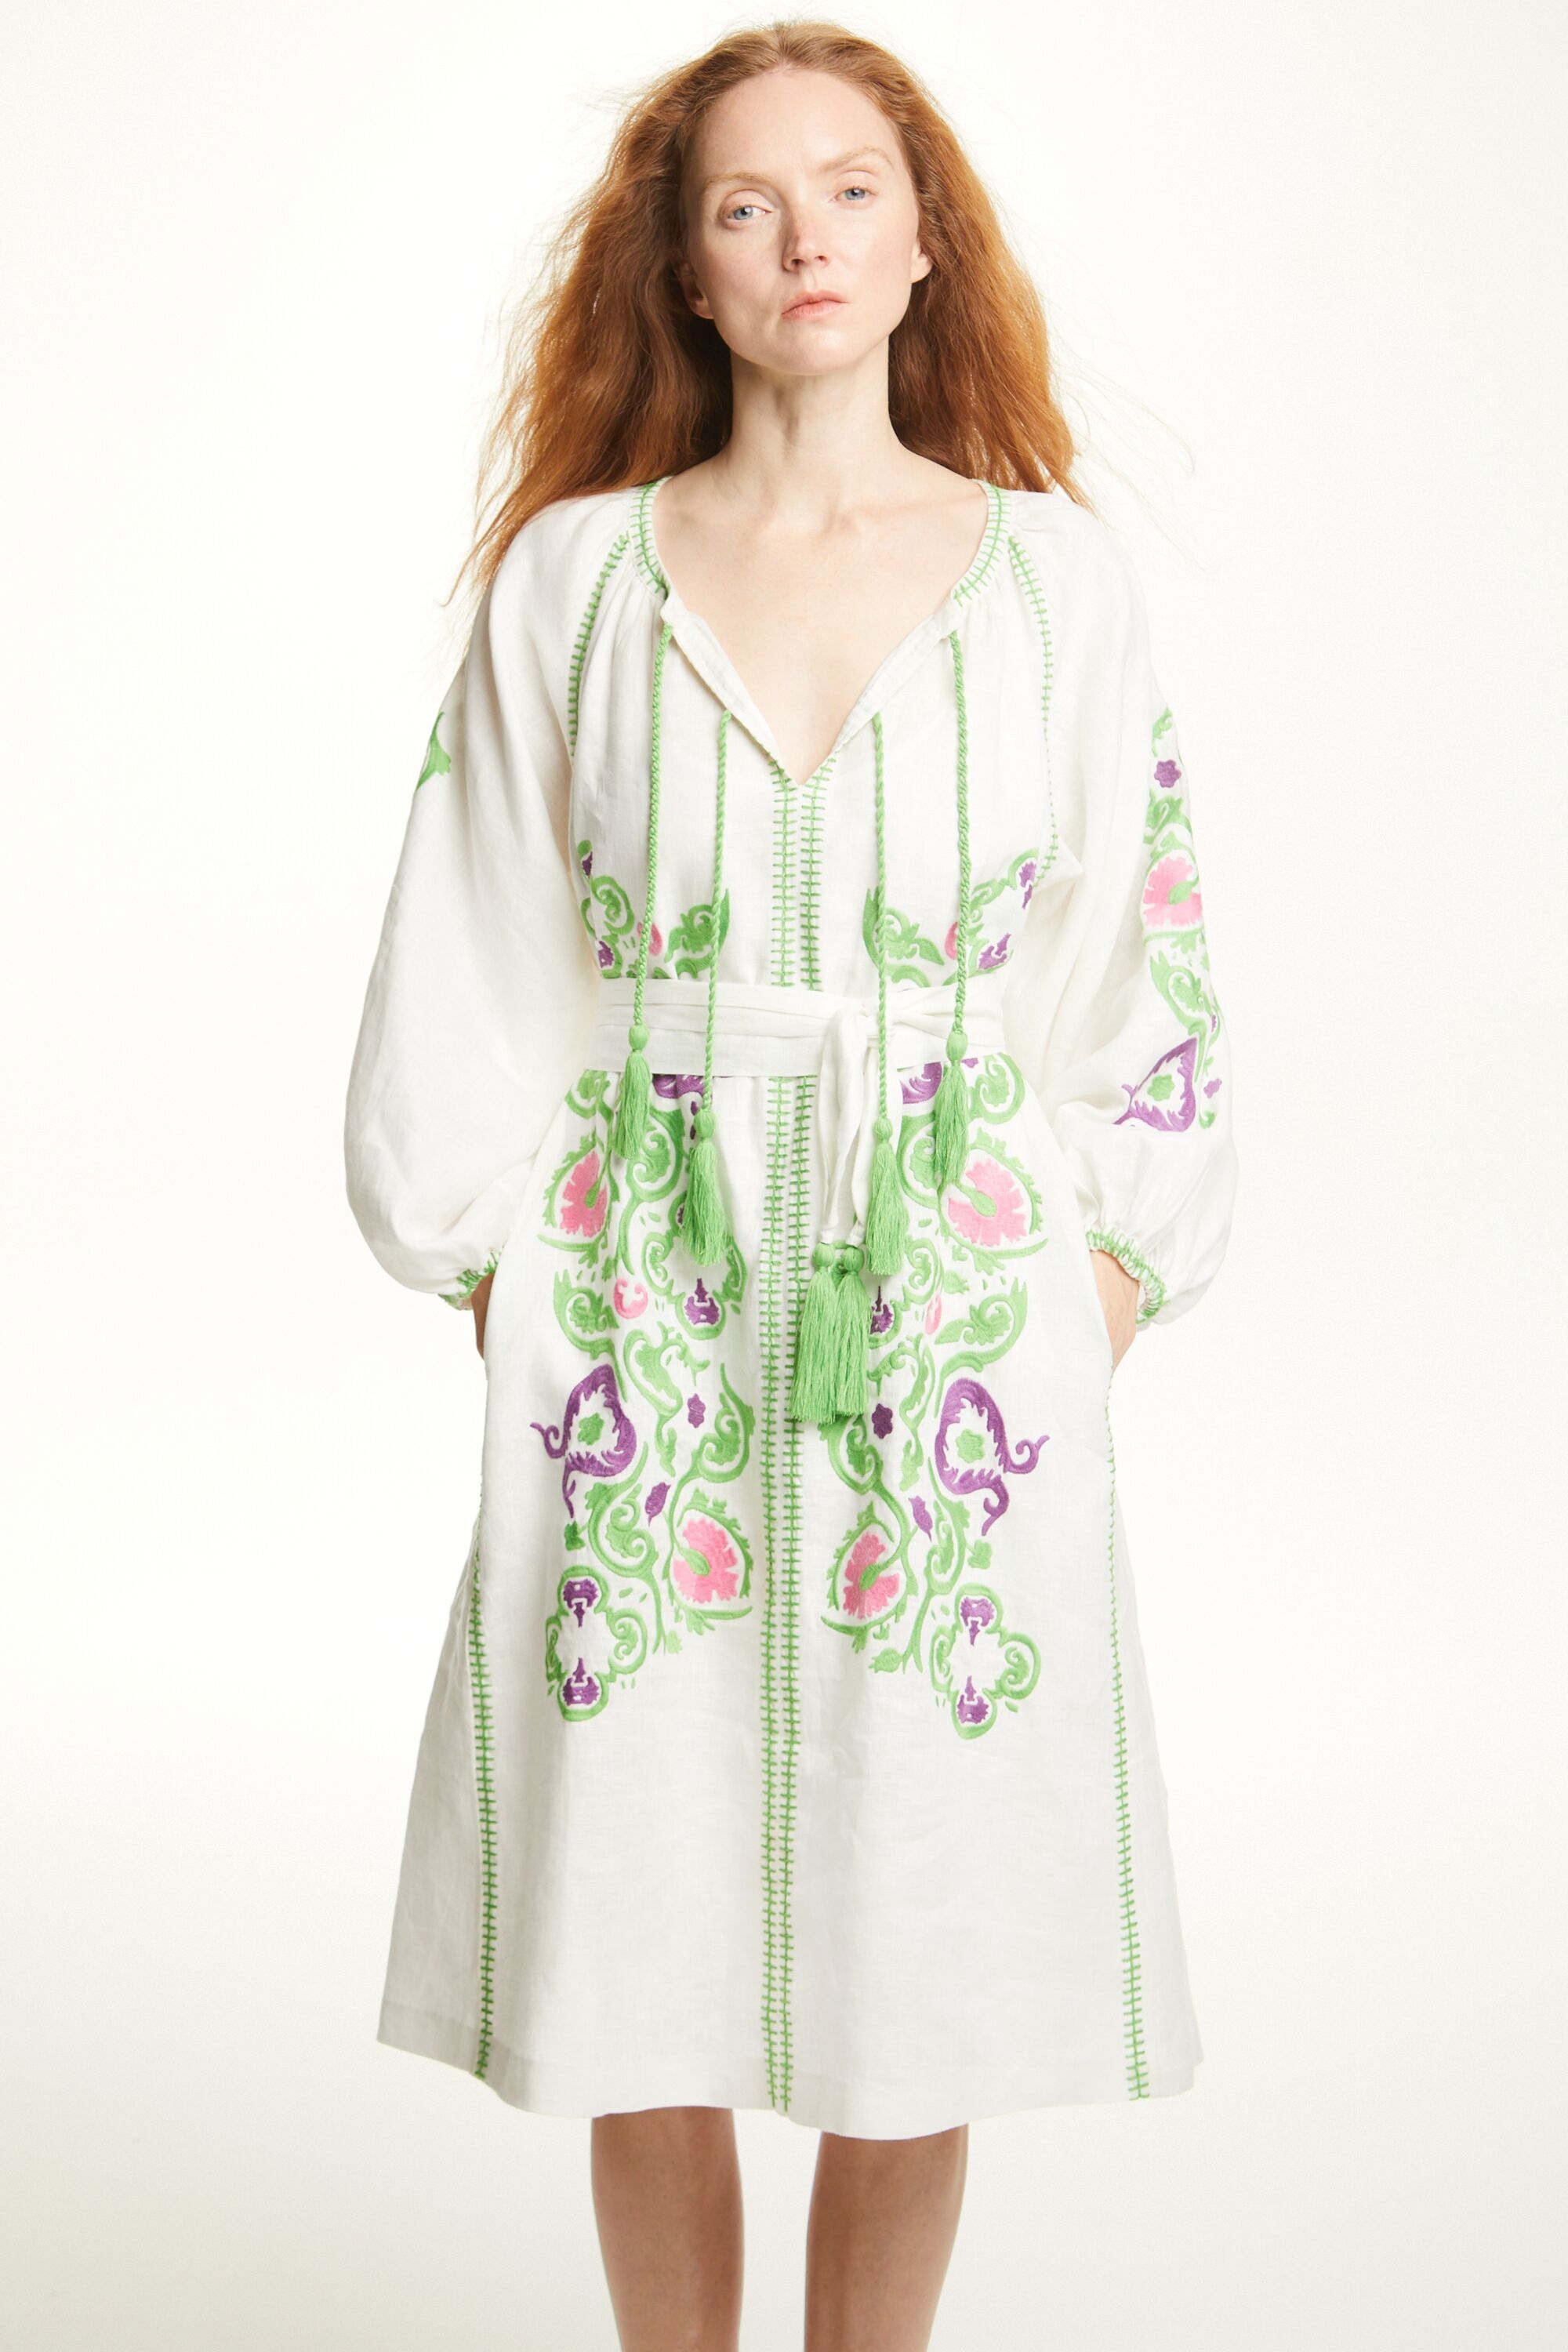 Linen dress with Garden embroidery